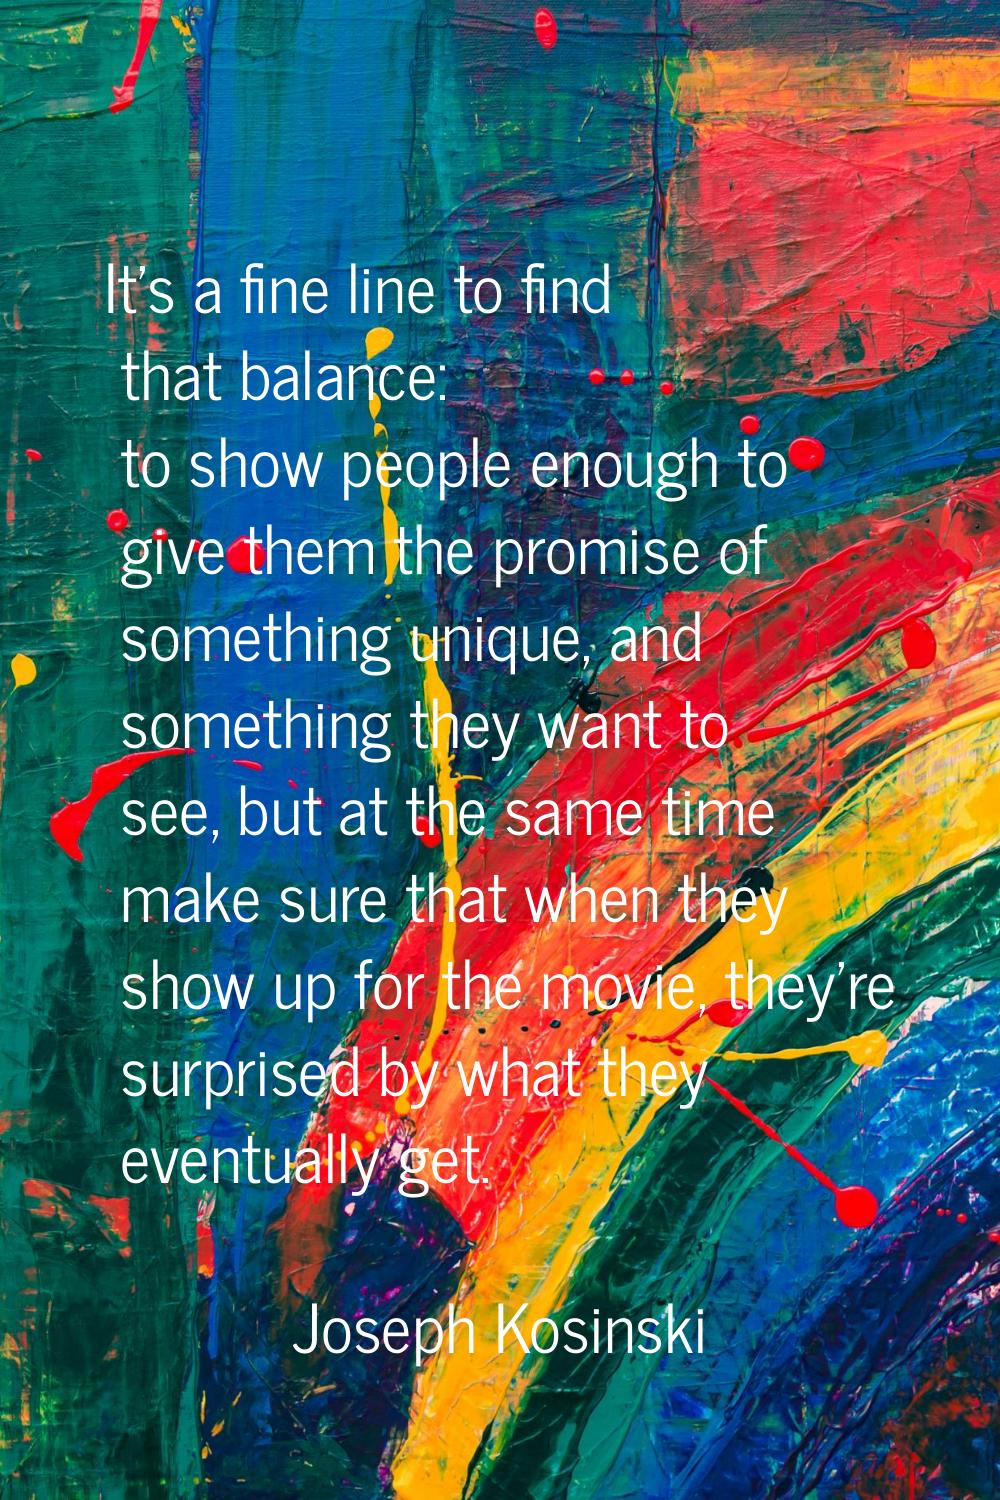 It's a fine line to find that balance: to show people enough to give them the promise of something 